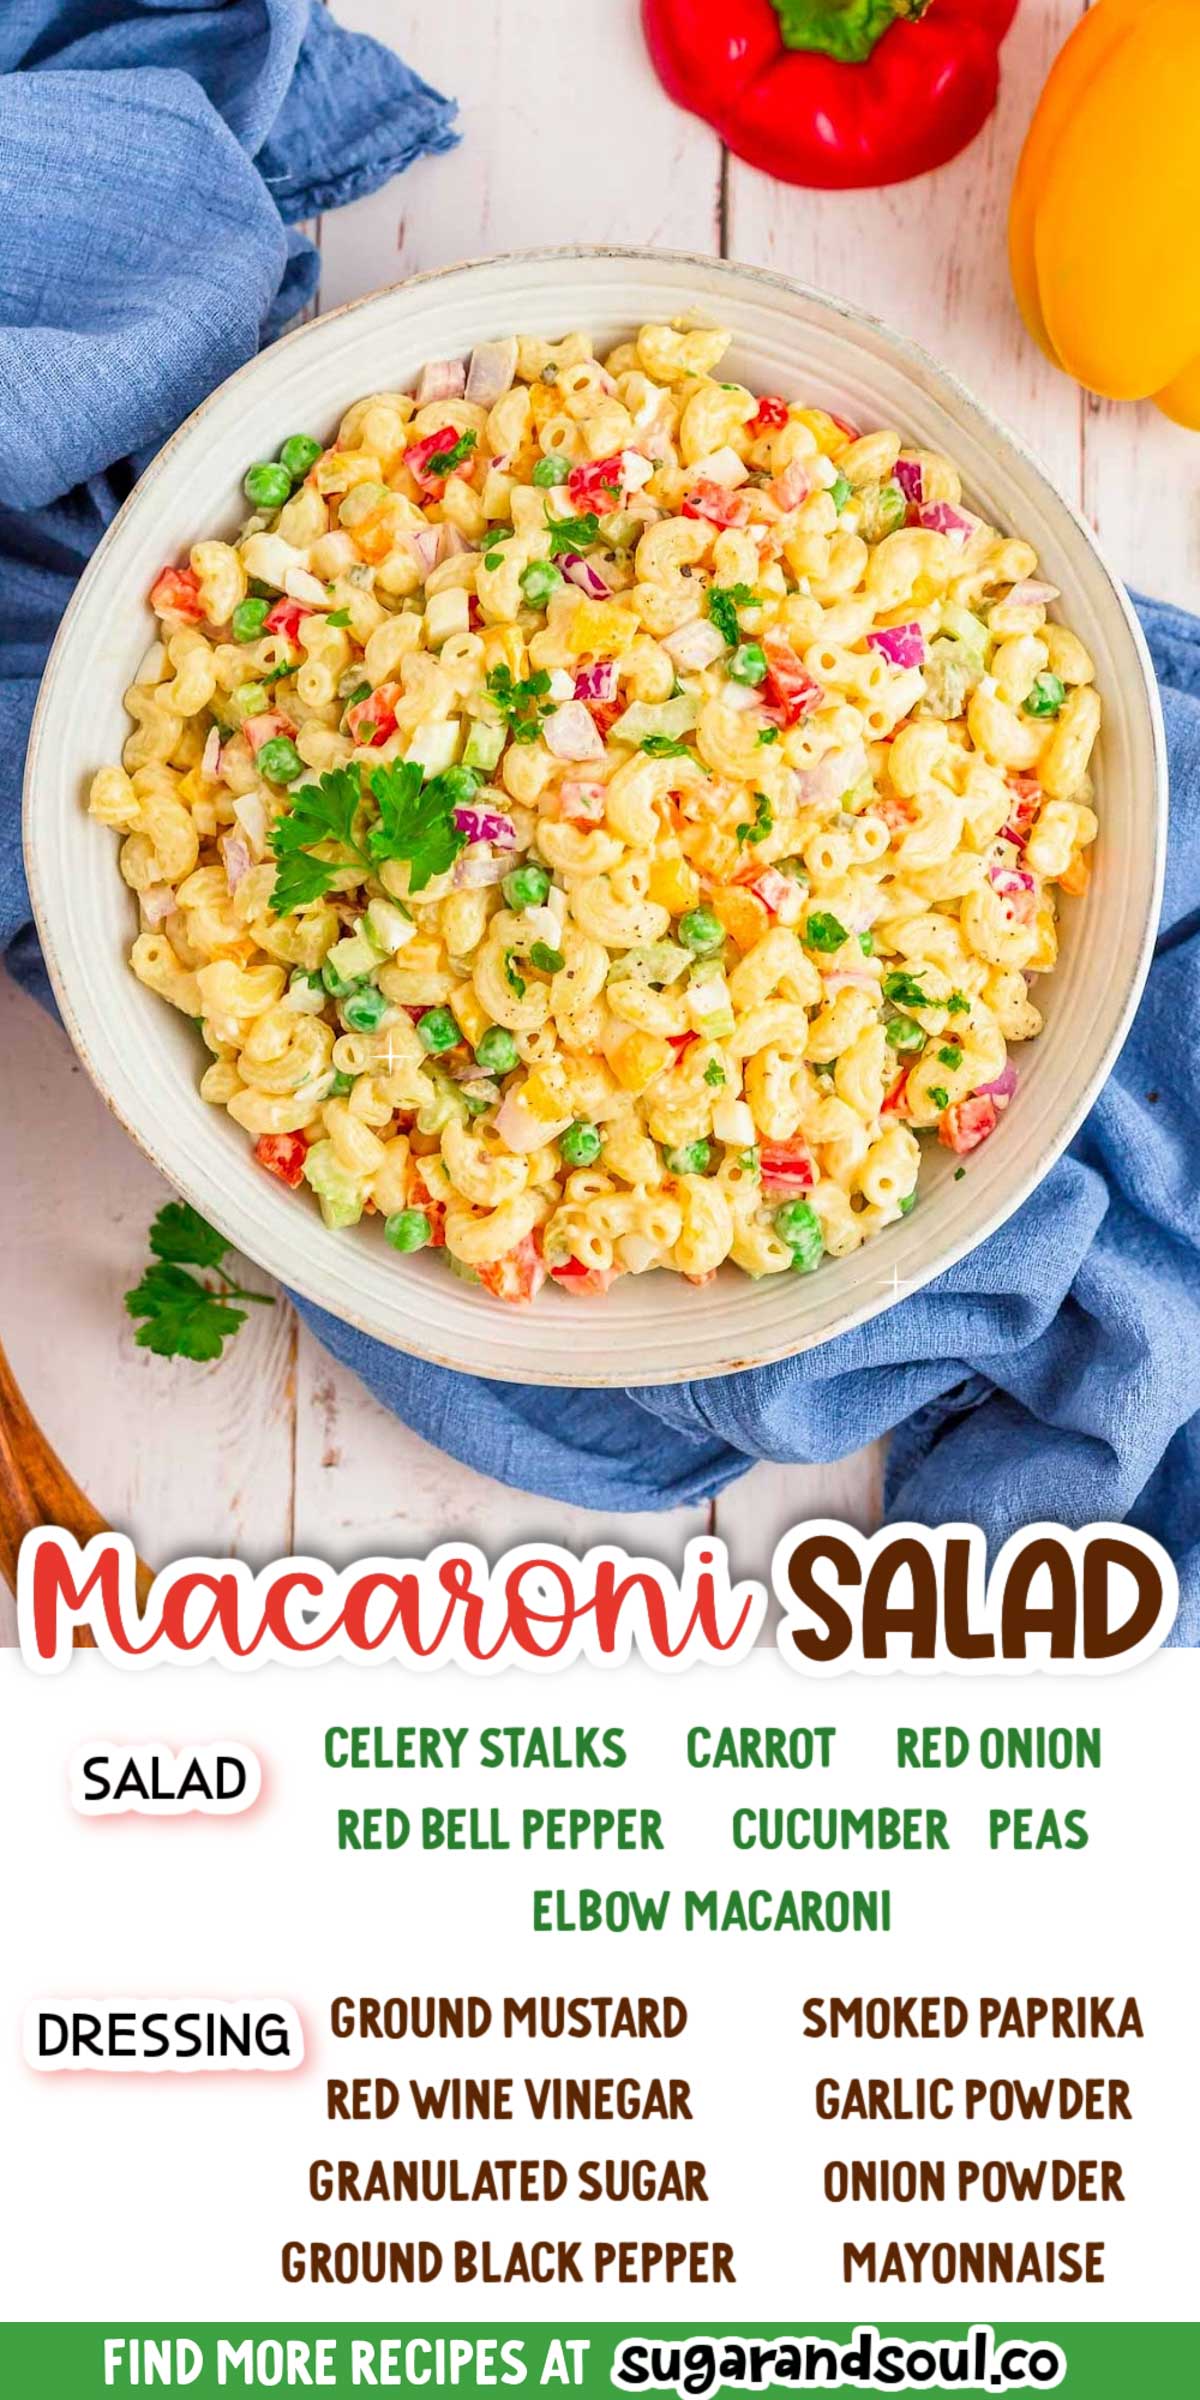 Classic Macaroni Salad has tender elbow macaroni, fresh veggies, and seasonings that are all coated in a creamy dressing! The perfect side dish for all of those backyard cookouts! via @sugarandsoulco